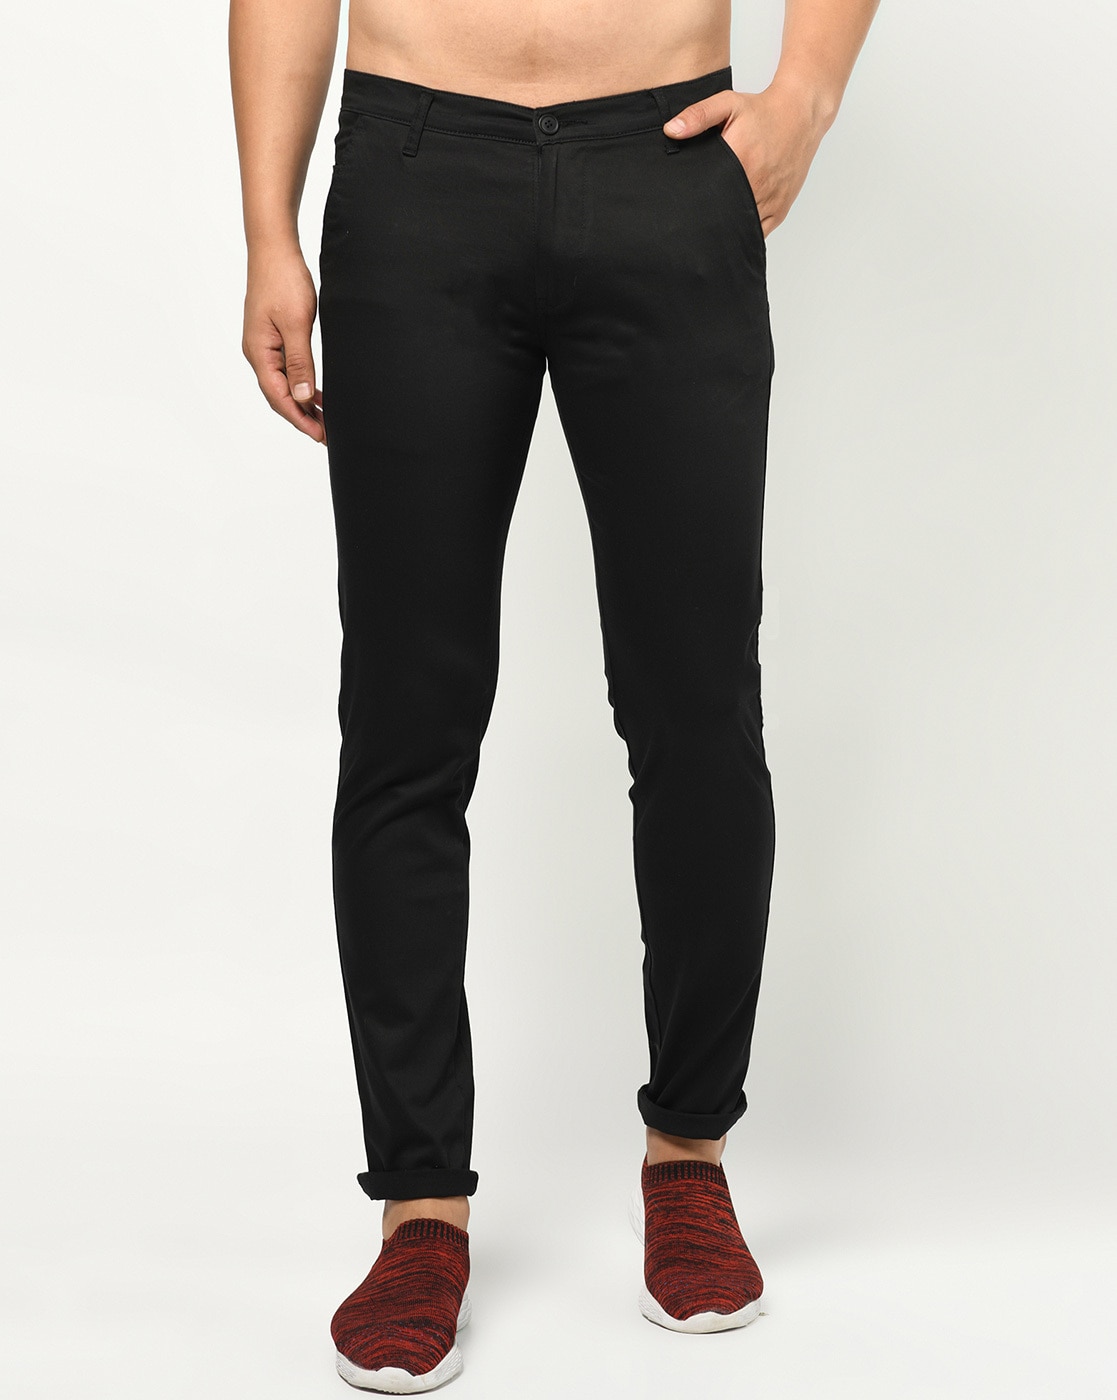 Solid Charcoal Black Chinos Stretchable Trousers